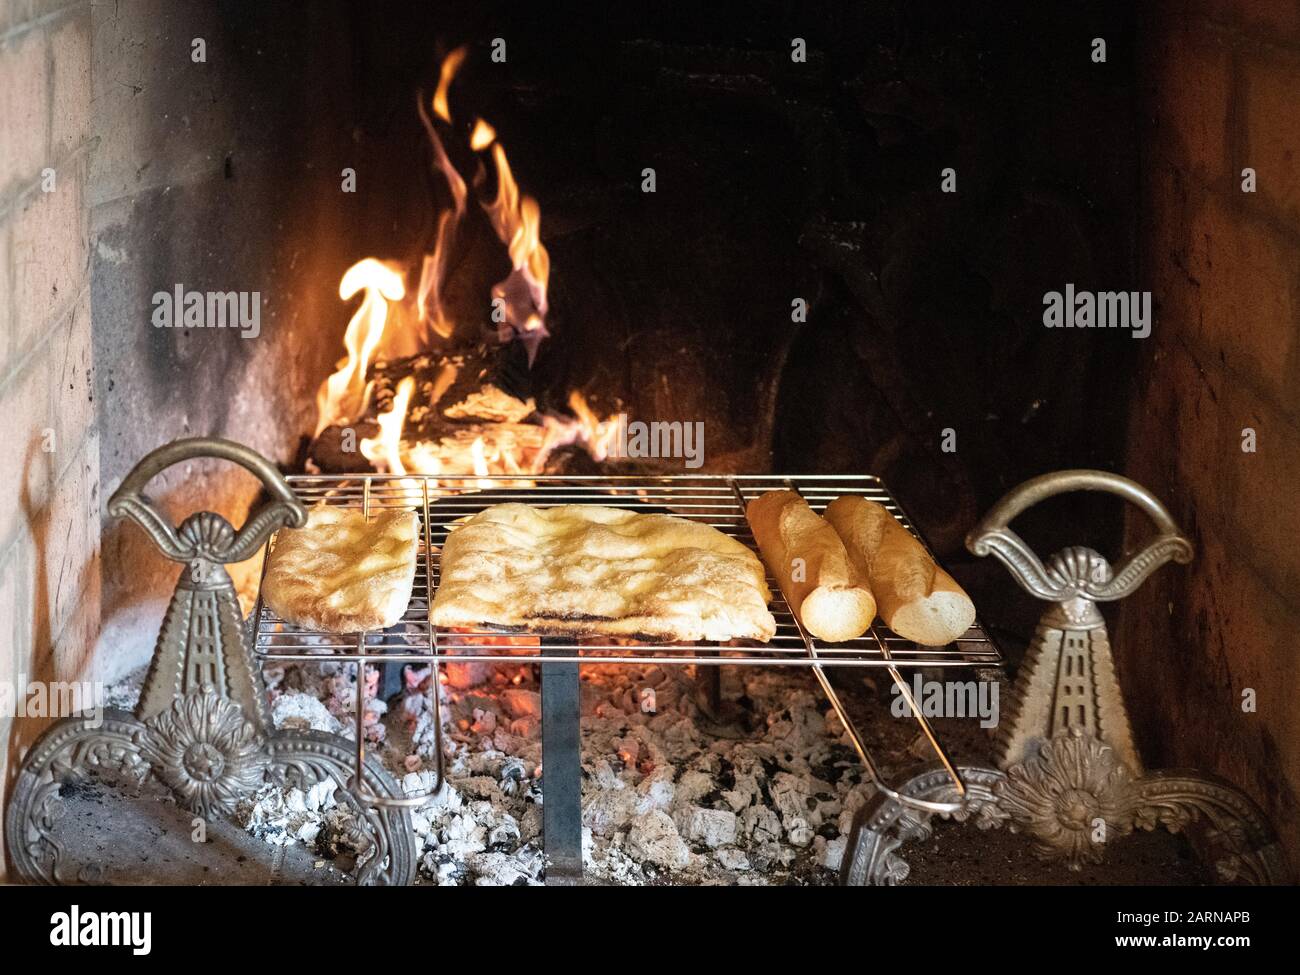 Bread heating on a rack over hot coals in a brick fireplace with burning fire in close up Stock Photo